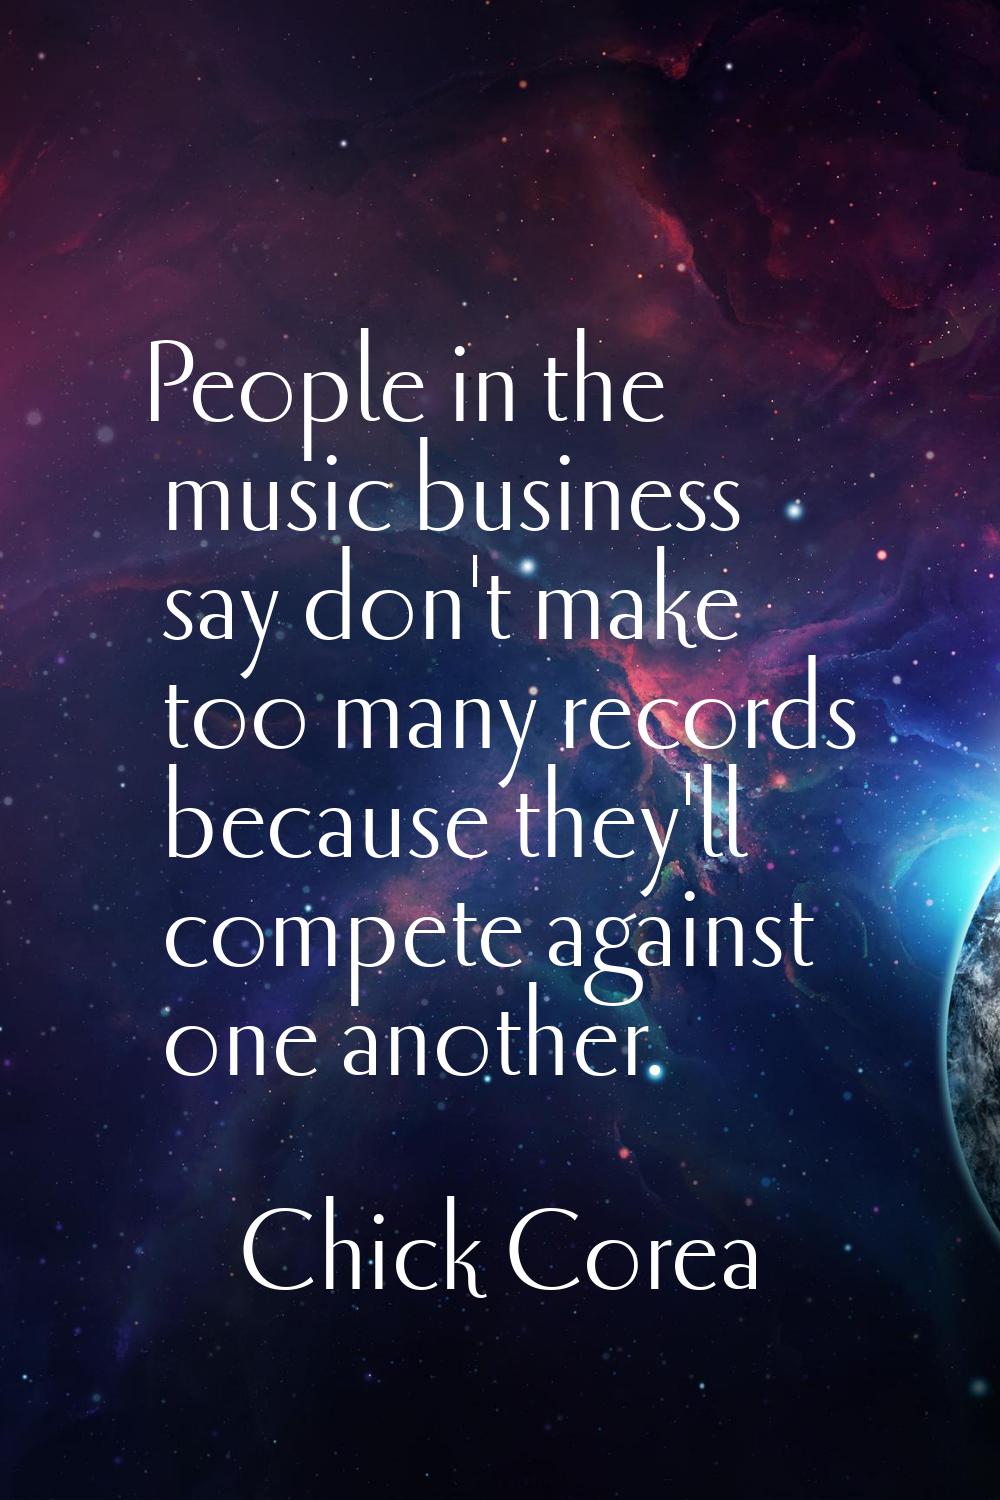 People in the music business say don't make too many records because they'll compete against one an